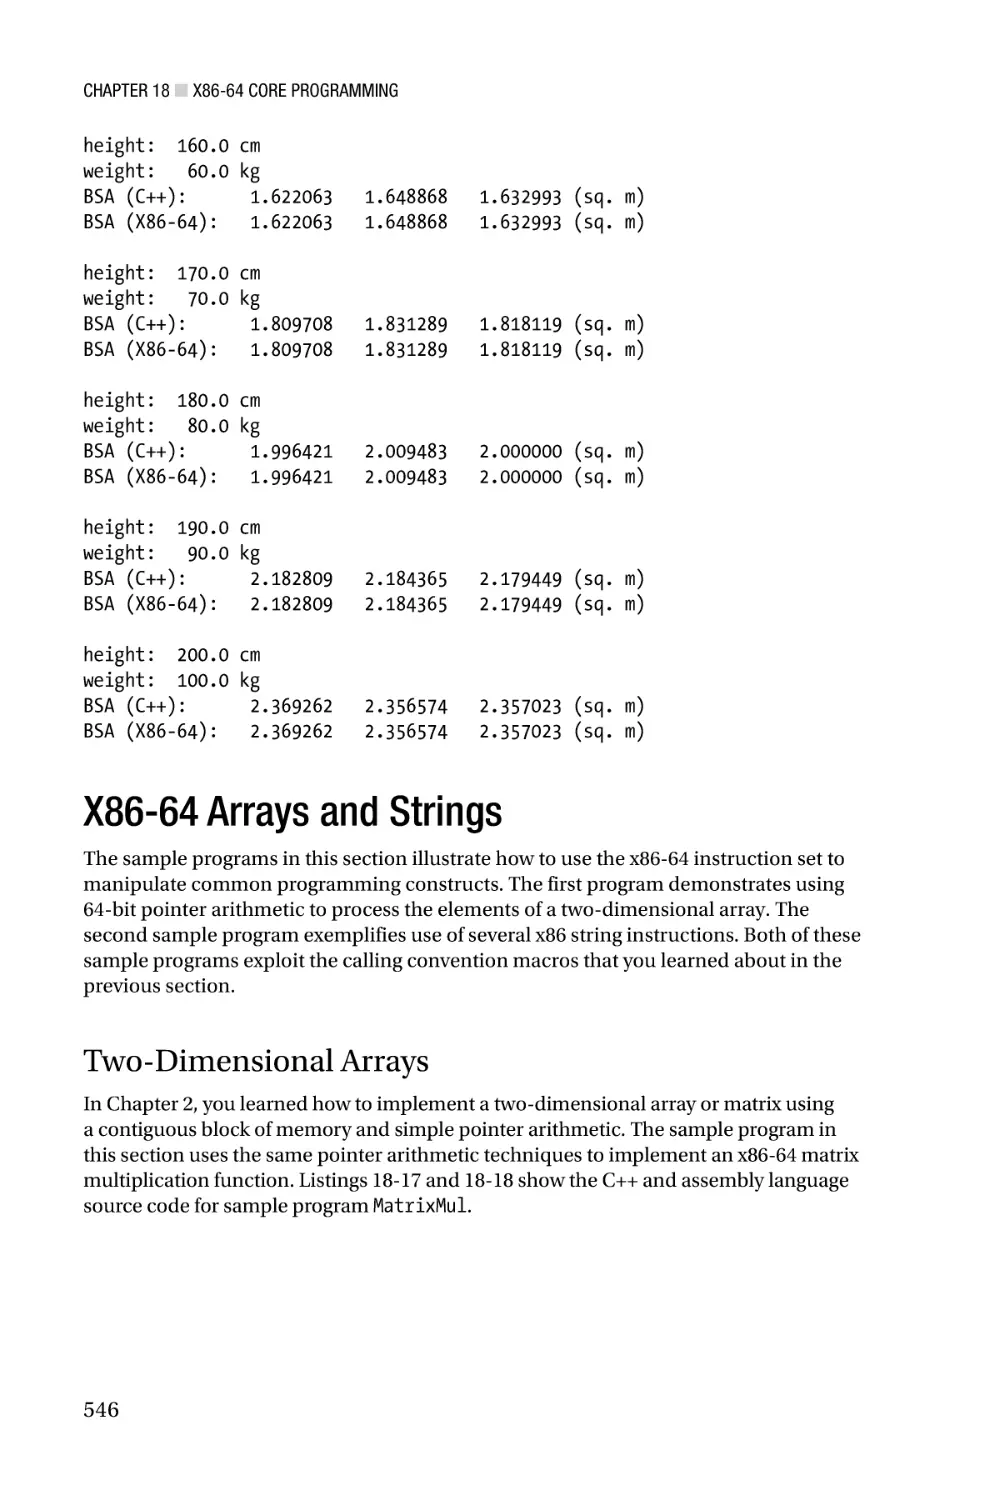 X86-64 Arrays and Strings
Two-Dimensional Arrays